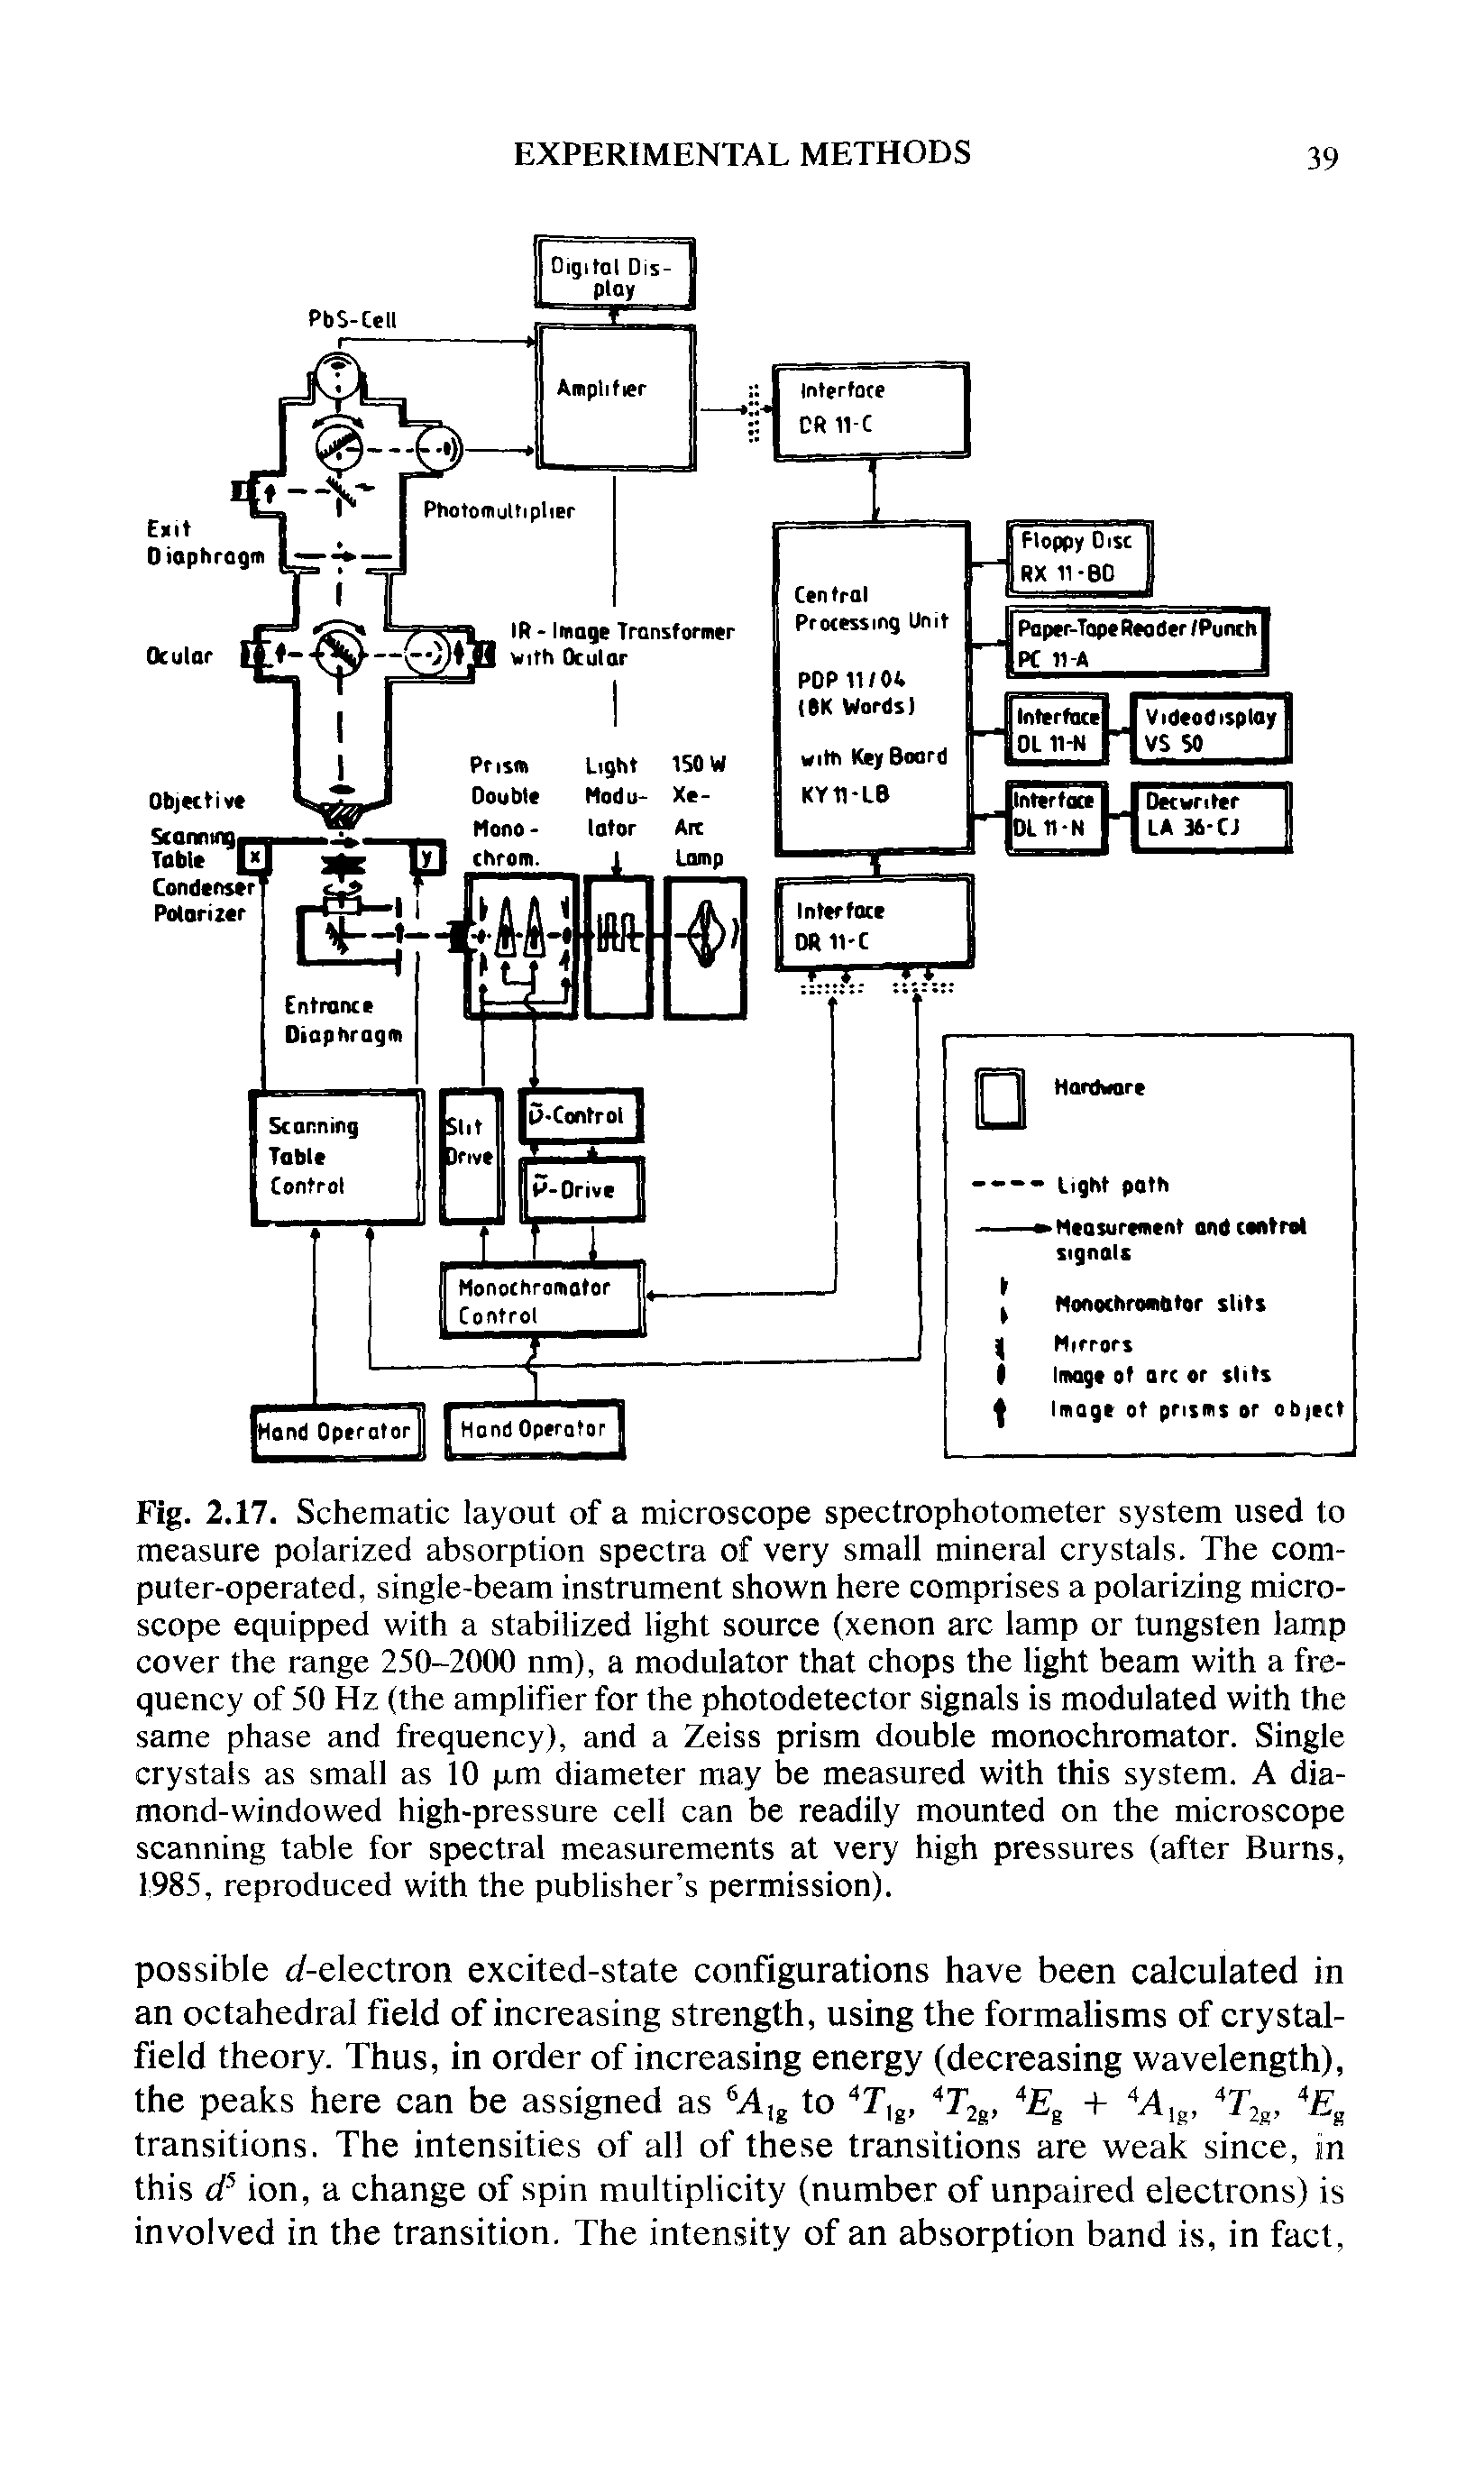 Fig. 2.17. Schematic layout of a microscope spectrophotometer system used to measure polarized absorption spectra of very small mineral crystals. The computer-operated, single-beam instrument shown here comprises a polarizing microscope equipped with a stabilized light source (xenon arc lamp or tungsten lamp cover the range 250-2000 nm), a modulator that chops the light beam with a frequency of 50 Hz (the amplifier for the photodetector signals is modulated with the same phase and frequency), and a Zeiss prism double monochromator. Single crystals as small as 10 ji.m diameter may be measured with this system. A diamond-windowed high-pressure cell can be readily mounted on the microscope scanning table for spectral measurements at very high pressures (after Burns, 1985, reproduced with the publisher s permission).